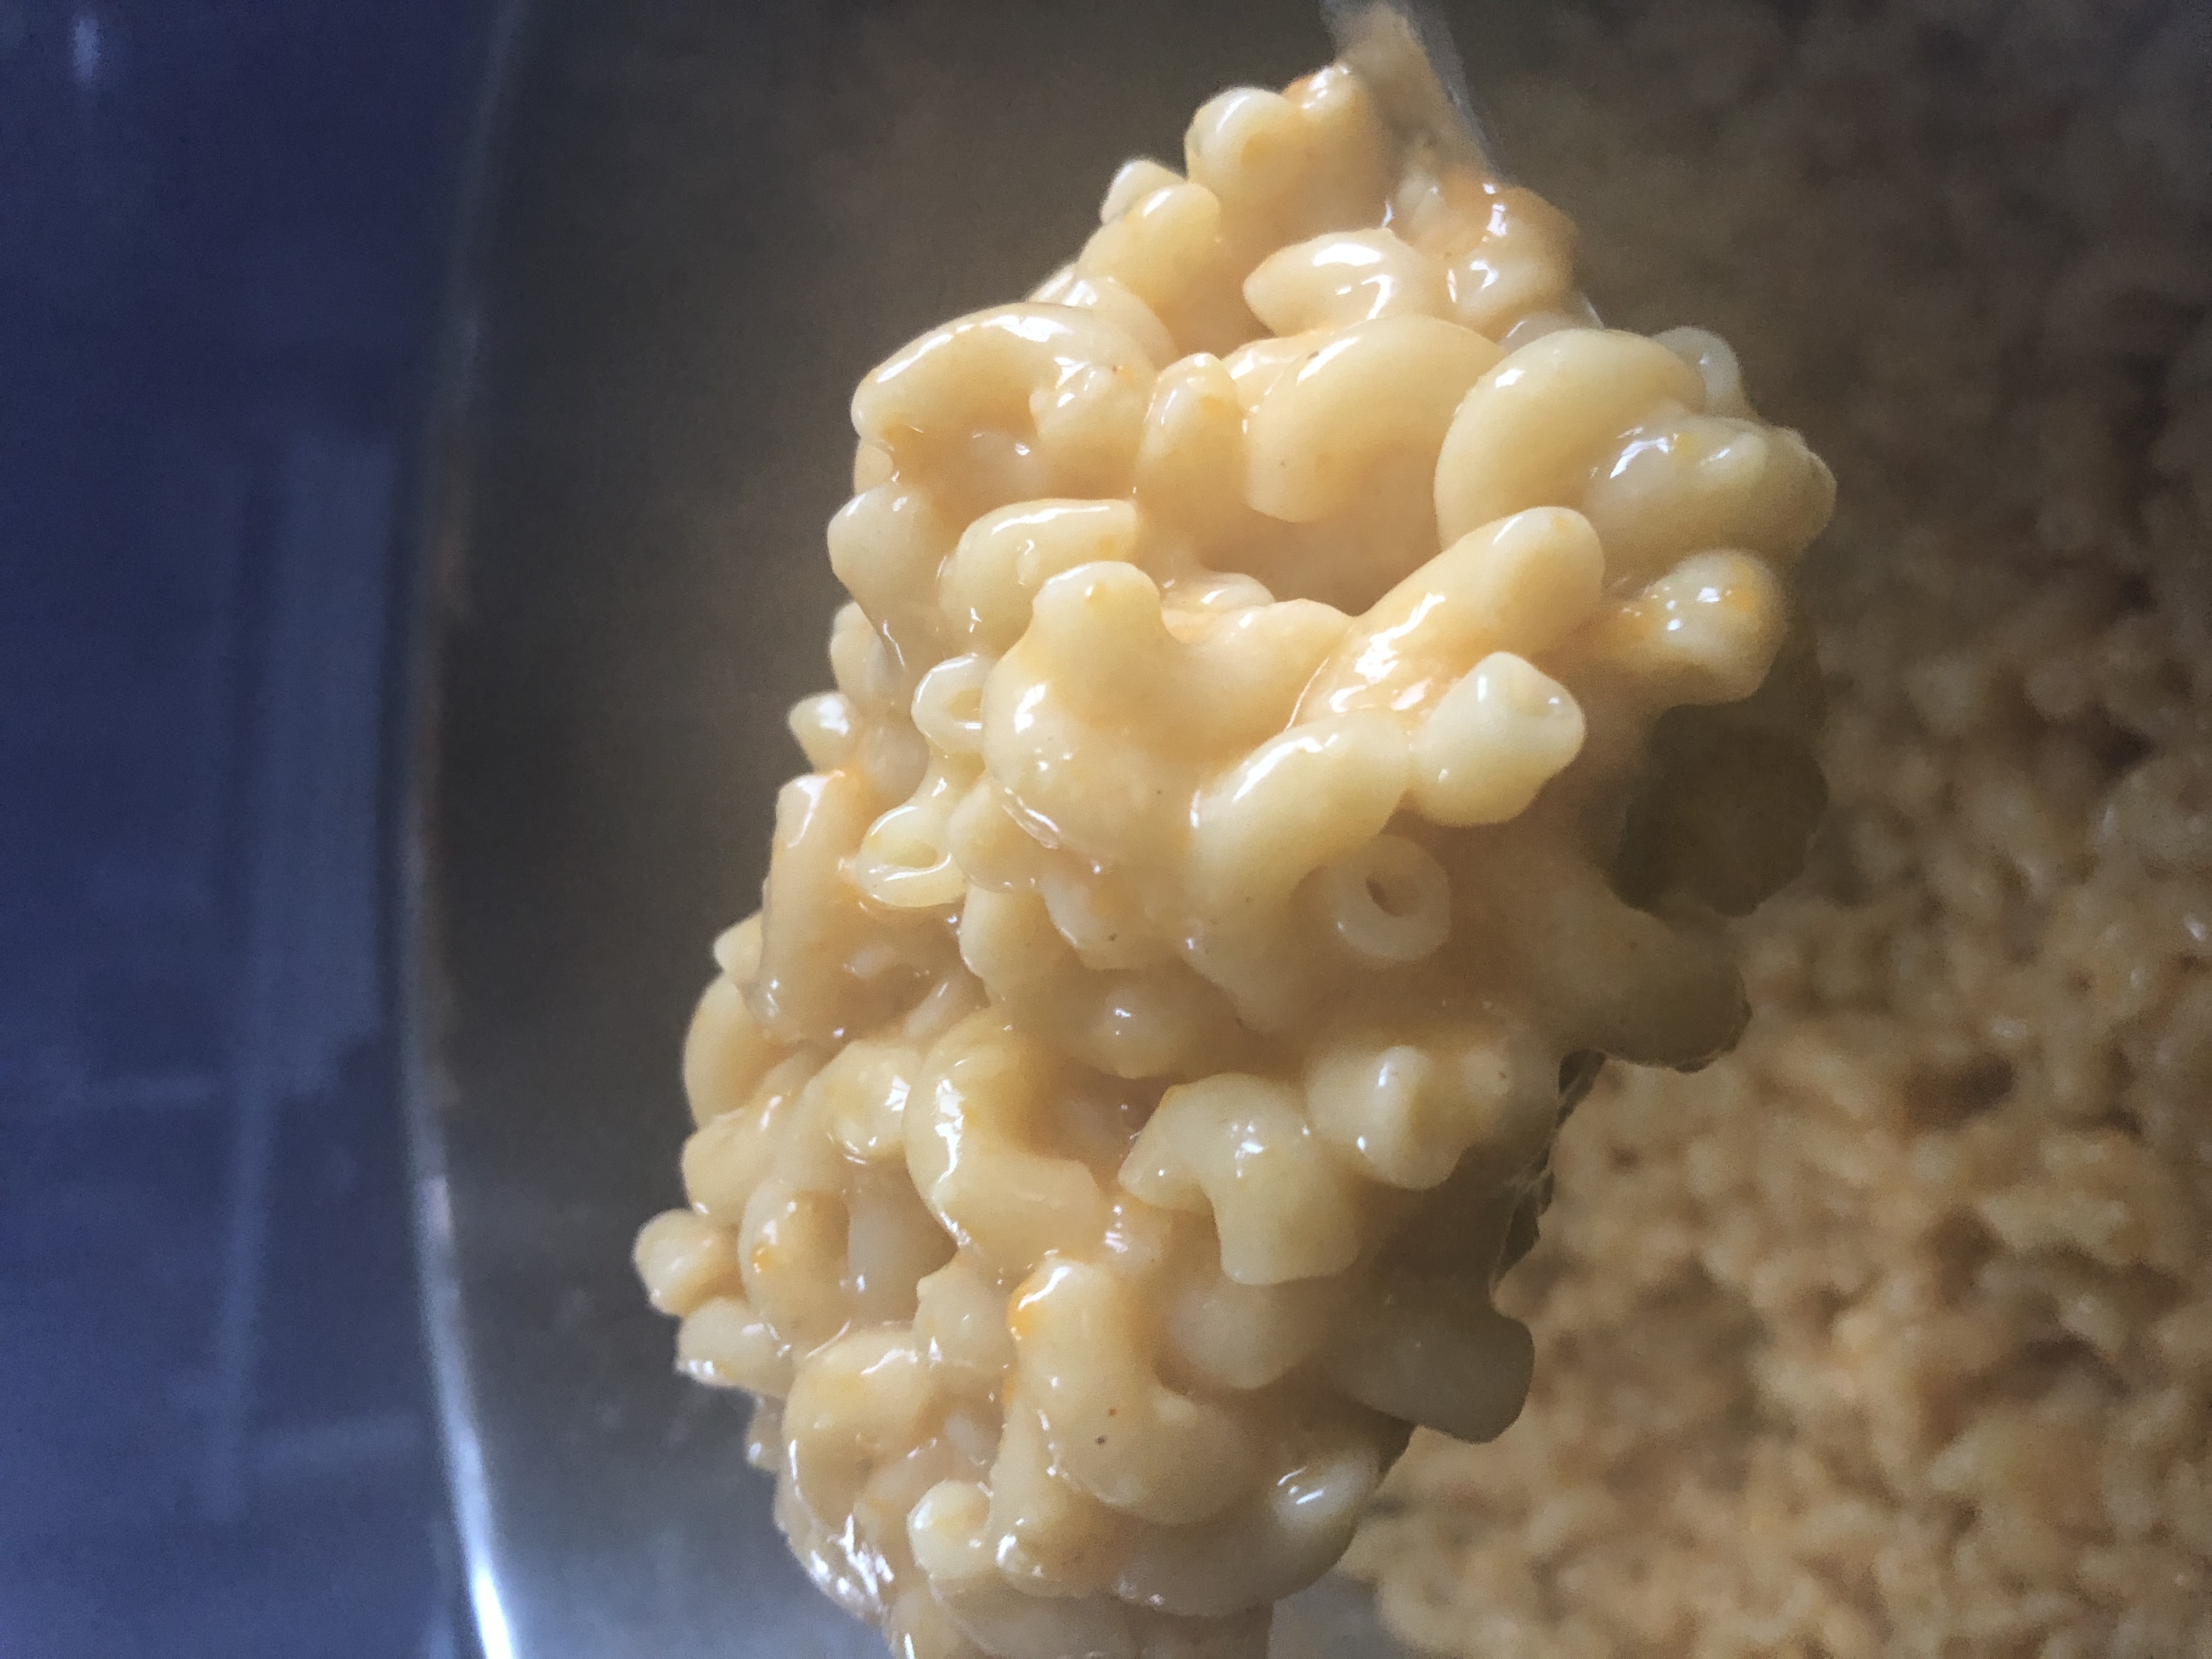 a scoop of the creamy mac and cheese after the vegan cheese melts into it